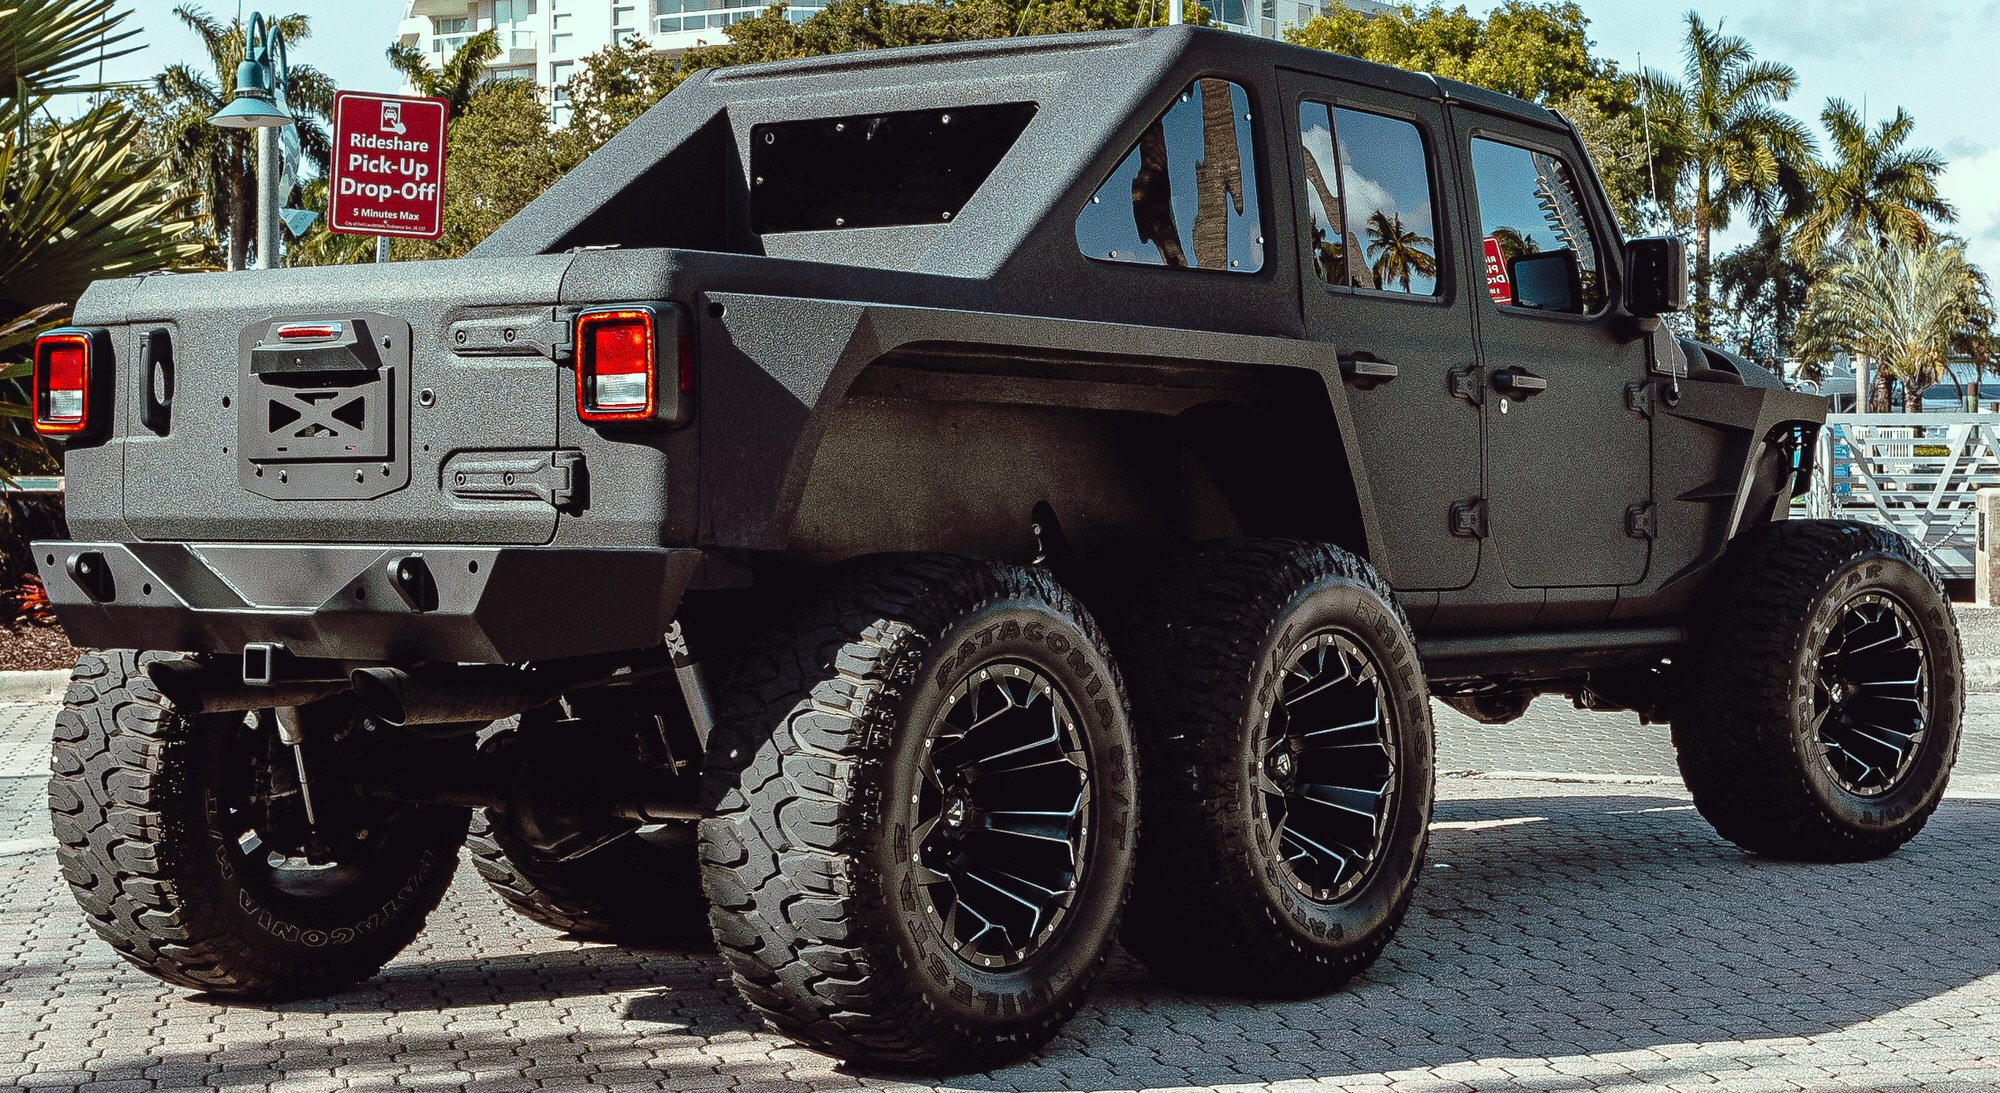 lamtac encounter muscle monster soflo jeeps builds a x wheels with hp engine block costing more than thousand dollars 64d5dfac68fae Encounter "muscle Monster" Soflo Jeeps Builds A 6x6 6 Wheels With 700 Hp Engine Block Costing More Than 400 Thousand Dollars